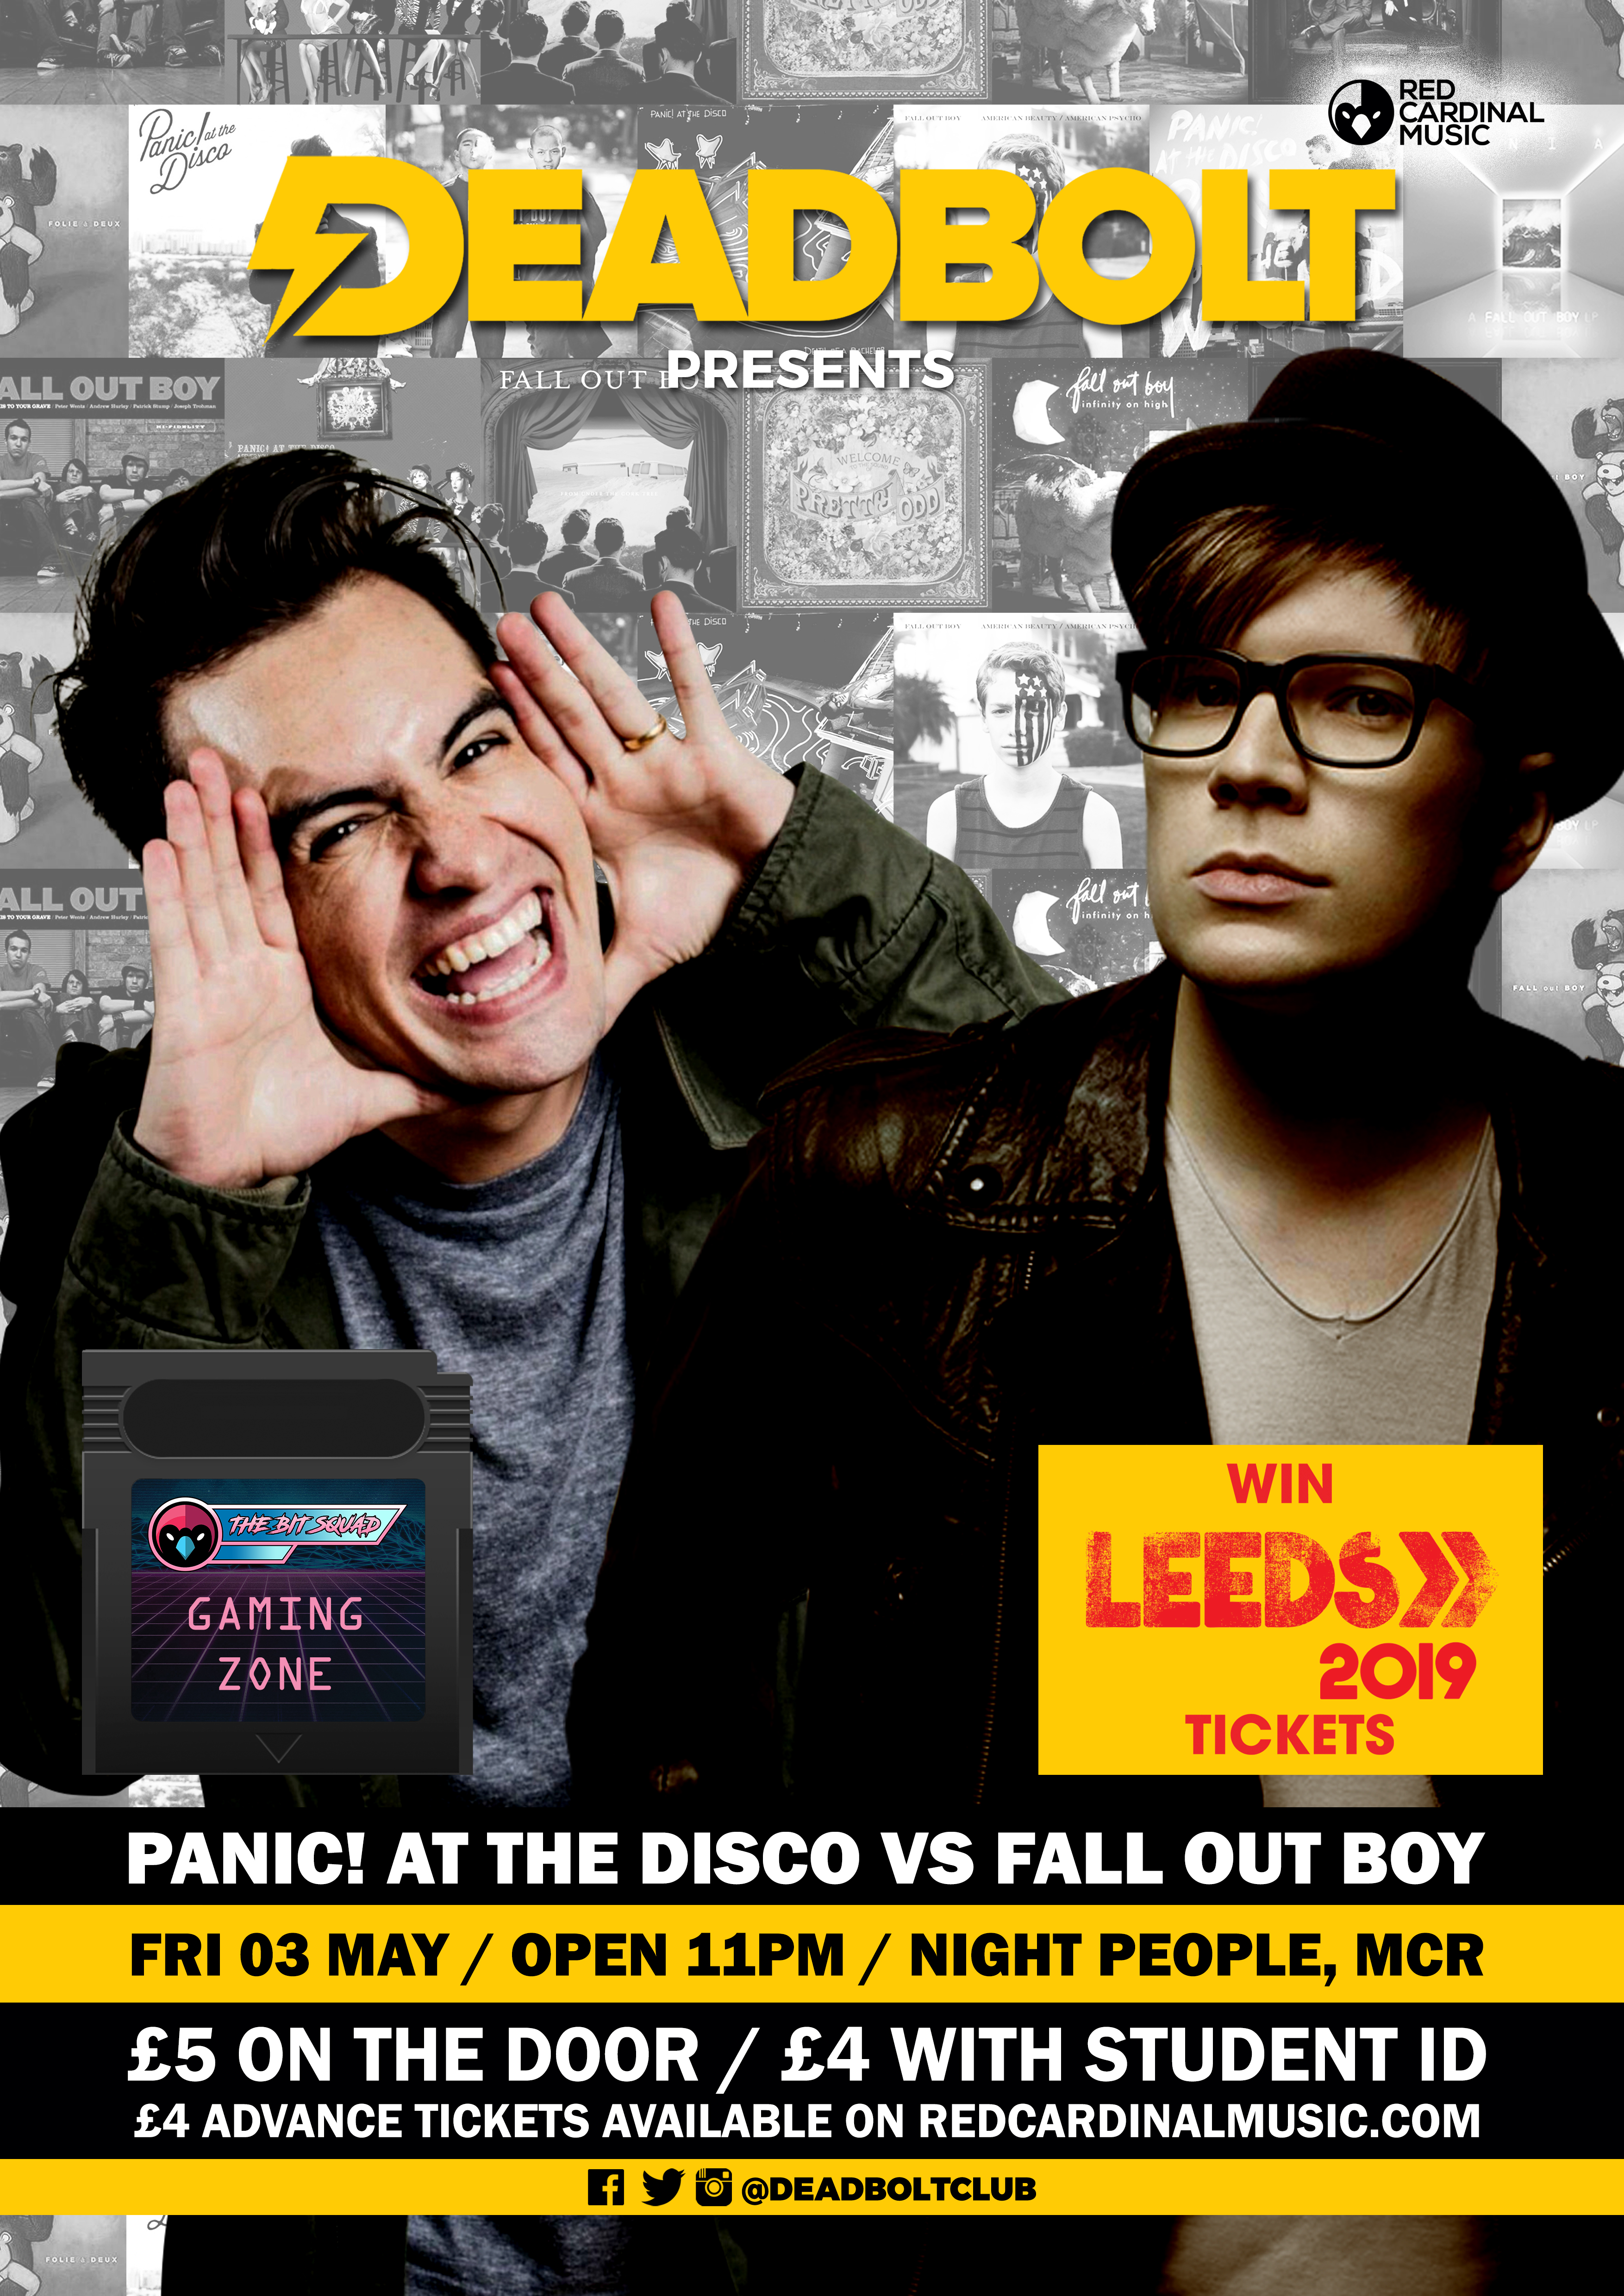 Deadbolt Manchester - Panic! At The Disco Vs Fall Out Boy Special - Night People Manchester - Red Cardinal Music